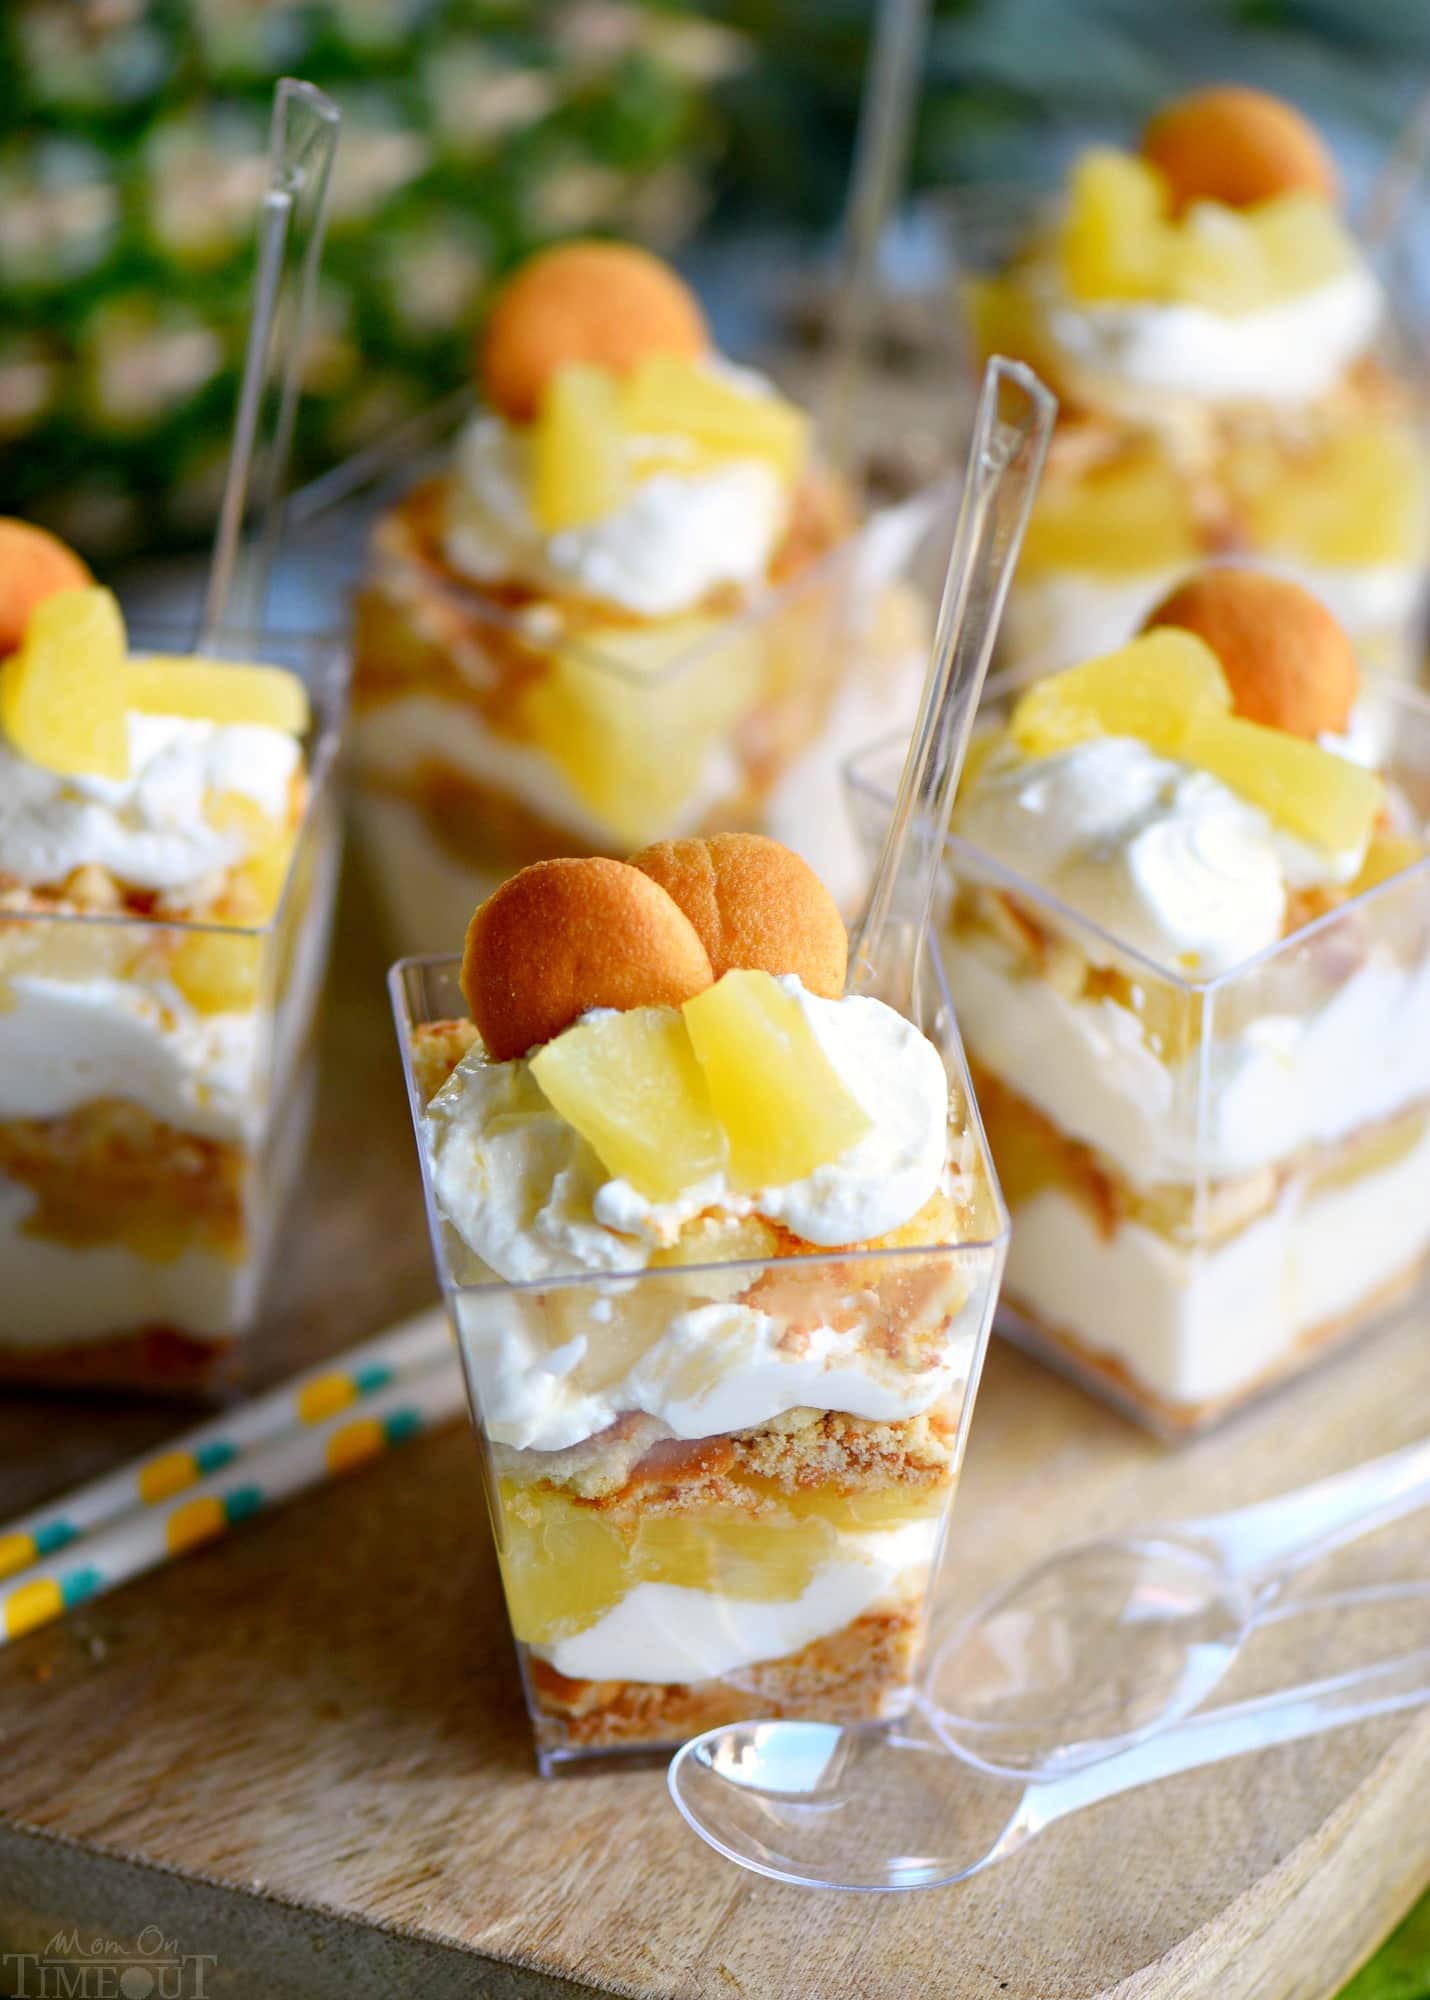 These Mini Pineapple Cheesecake Trifles are loaded with pineapple flavor! Perfect for an after-school snack, dessert, or party! 